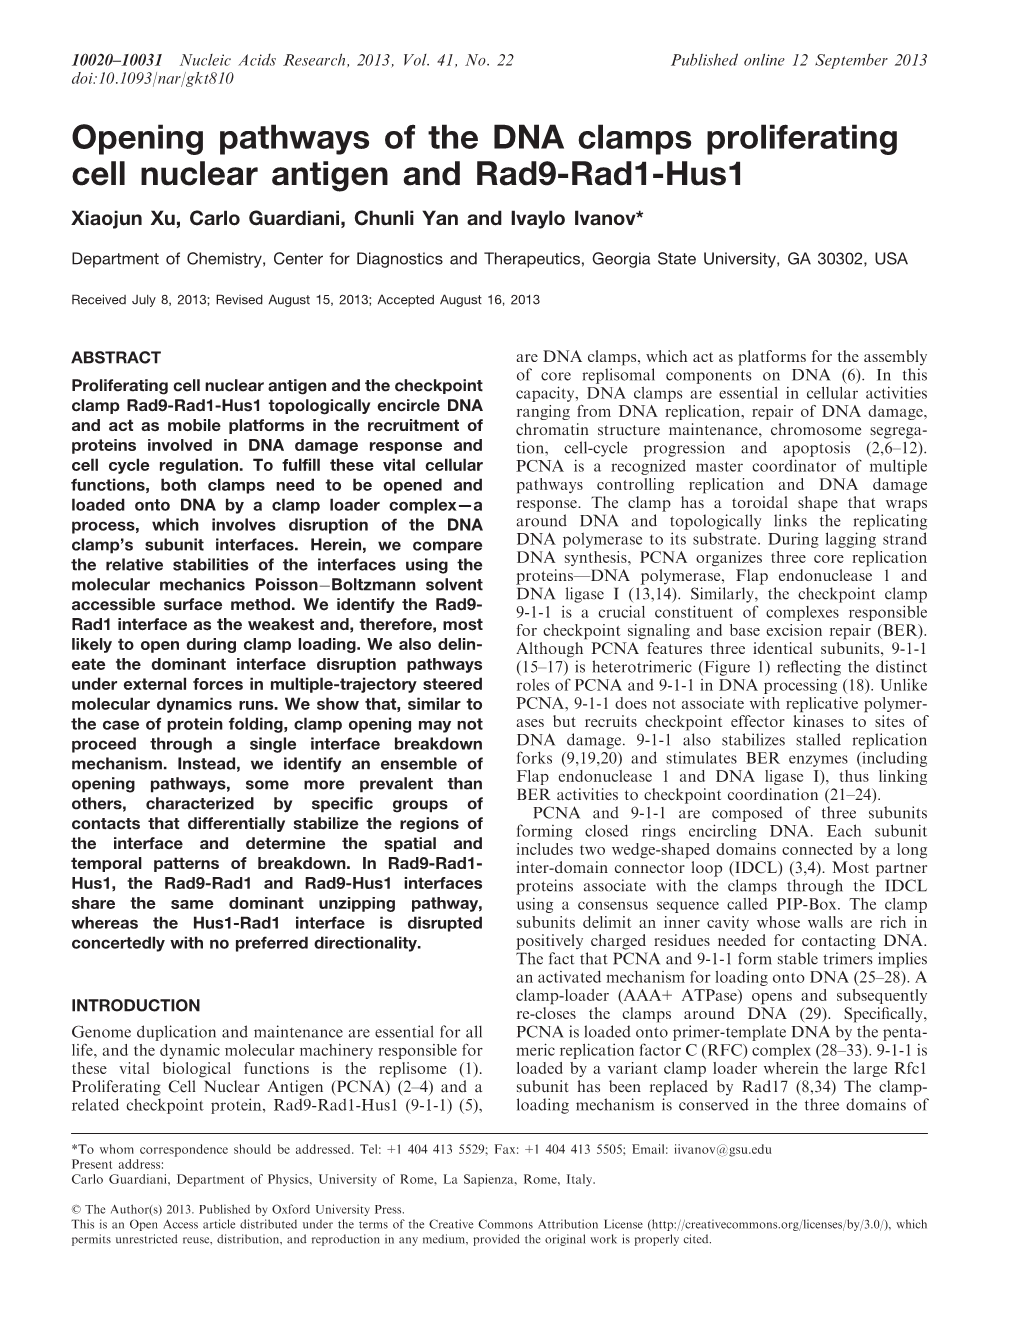 Opening Pathways of the DNA Clamps Proliferating Cell Nuclear Antigen and Rad9-Rad1-Hus1 Xiaojun Xu, Carlo Guardiani, Chunli Yan and Ivaylo Ivanov*